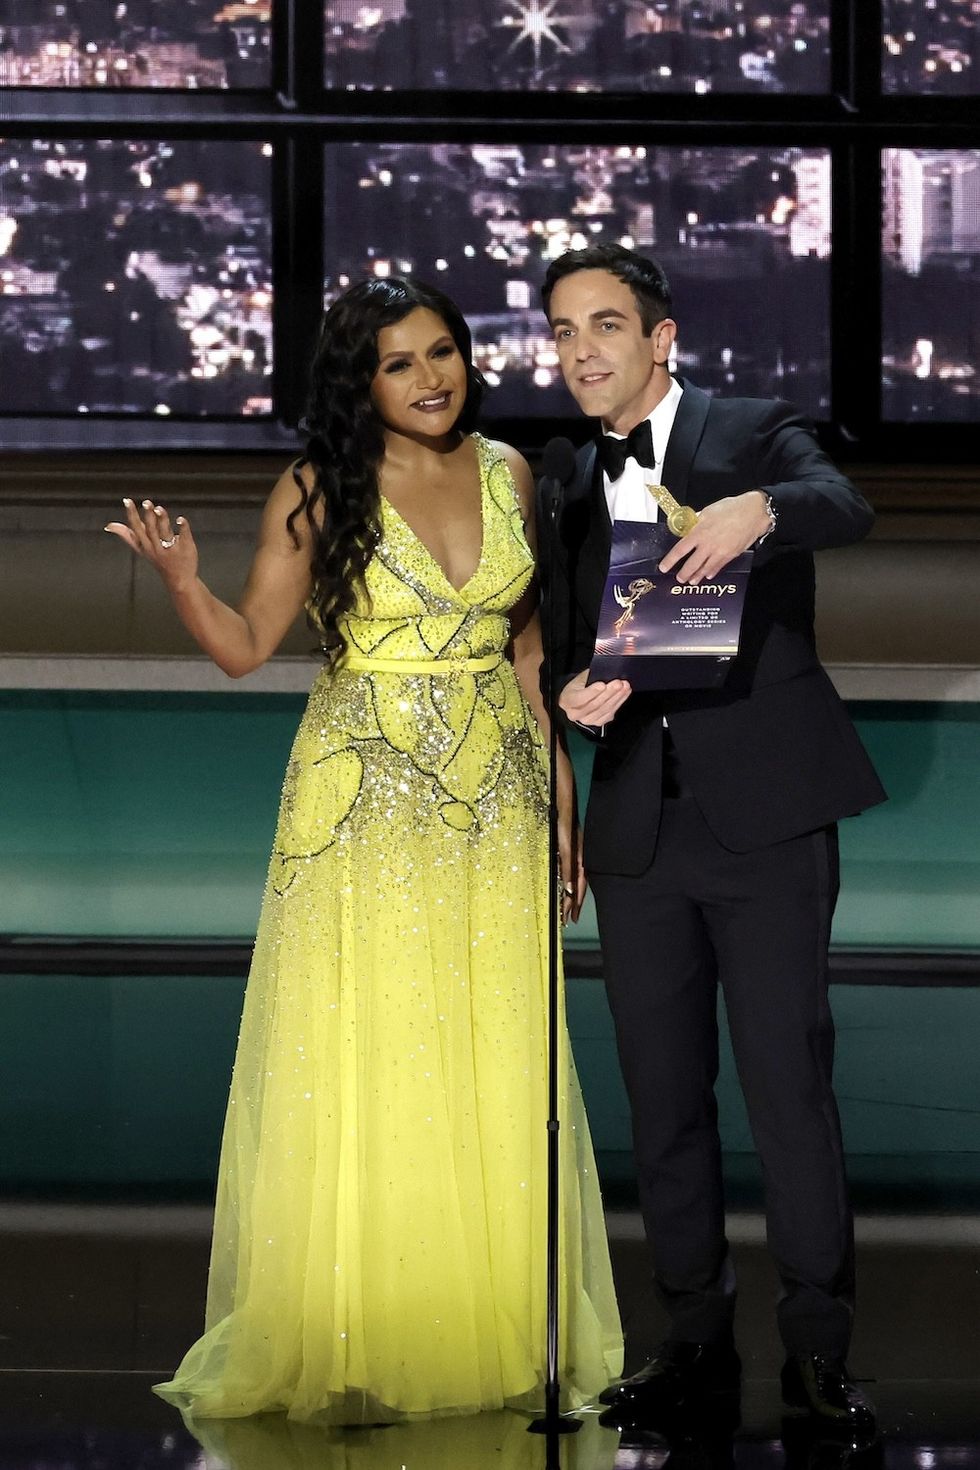 mindy kaling and bj novak at the 2022 emmys